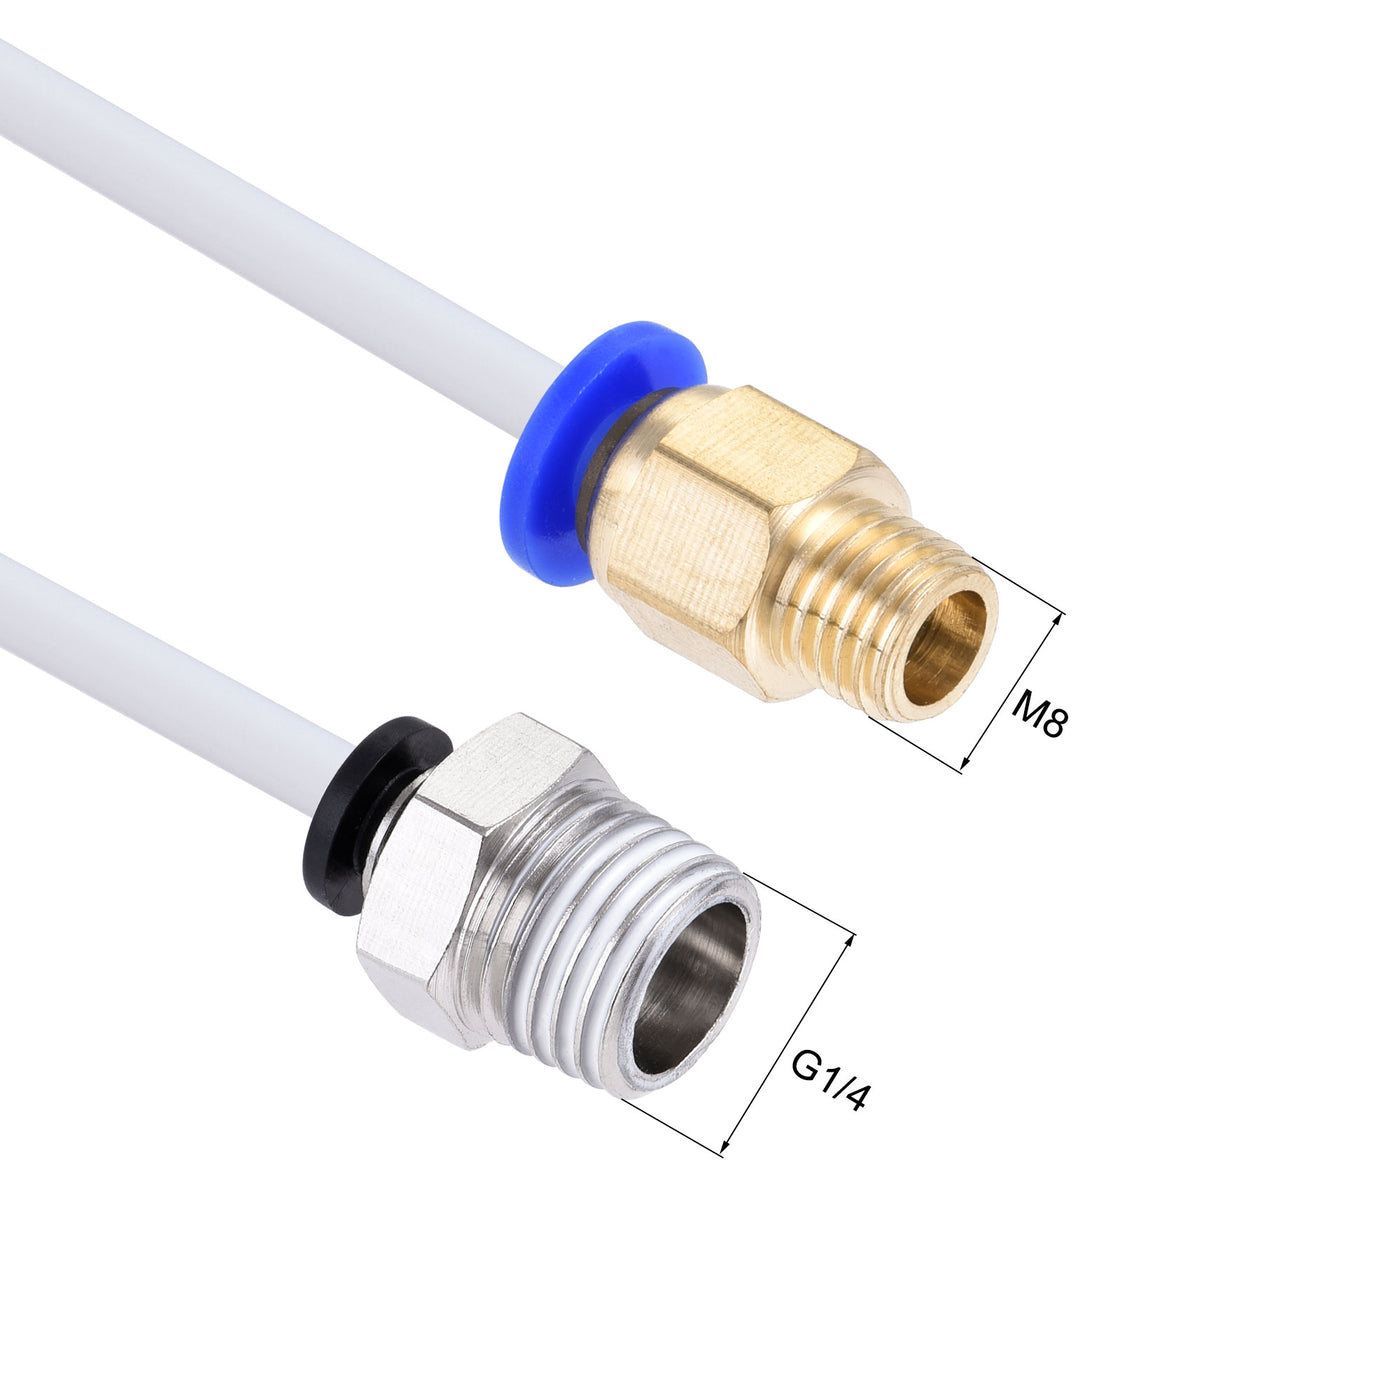 uxcell Uxcell Pneumatic PTFE Air Tubing Kit Hose Air Line Tubing 4mm OD 2M White with M8 G1/4 Push to Connect Fittings